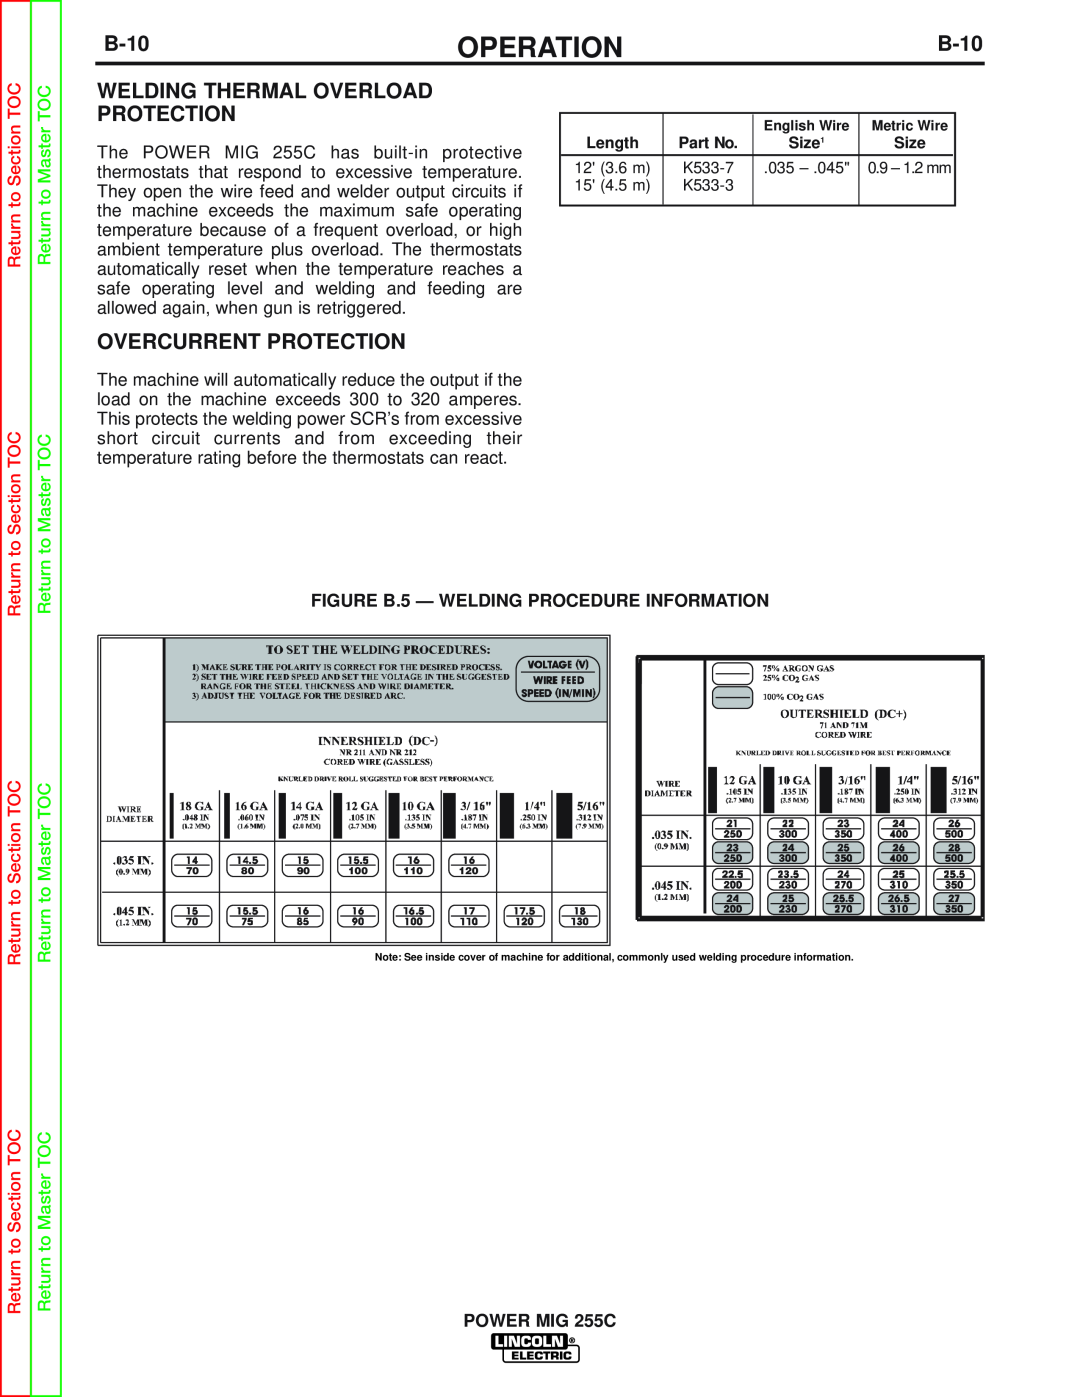 Lincoln Electric SVM170-A service manual B-10, Welding Thermal Overload Protection, Overcurrent Protection, Operation 